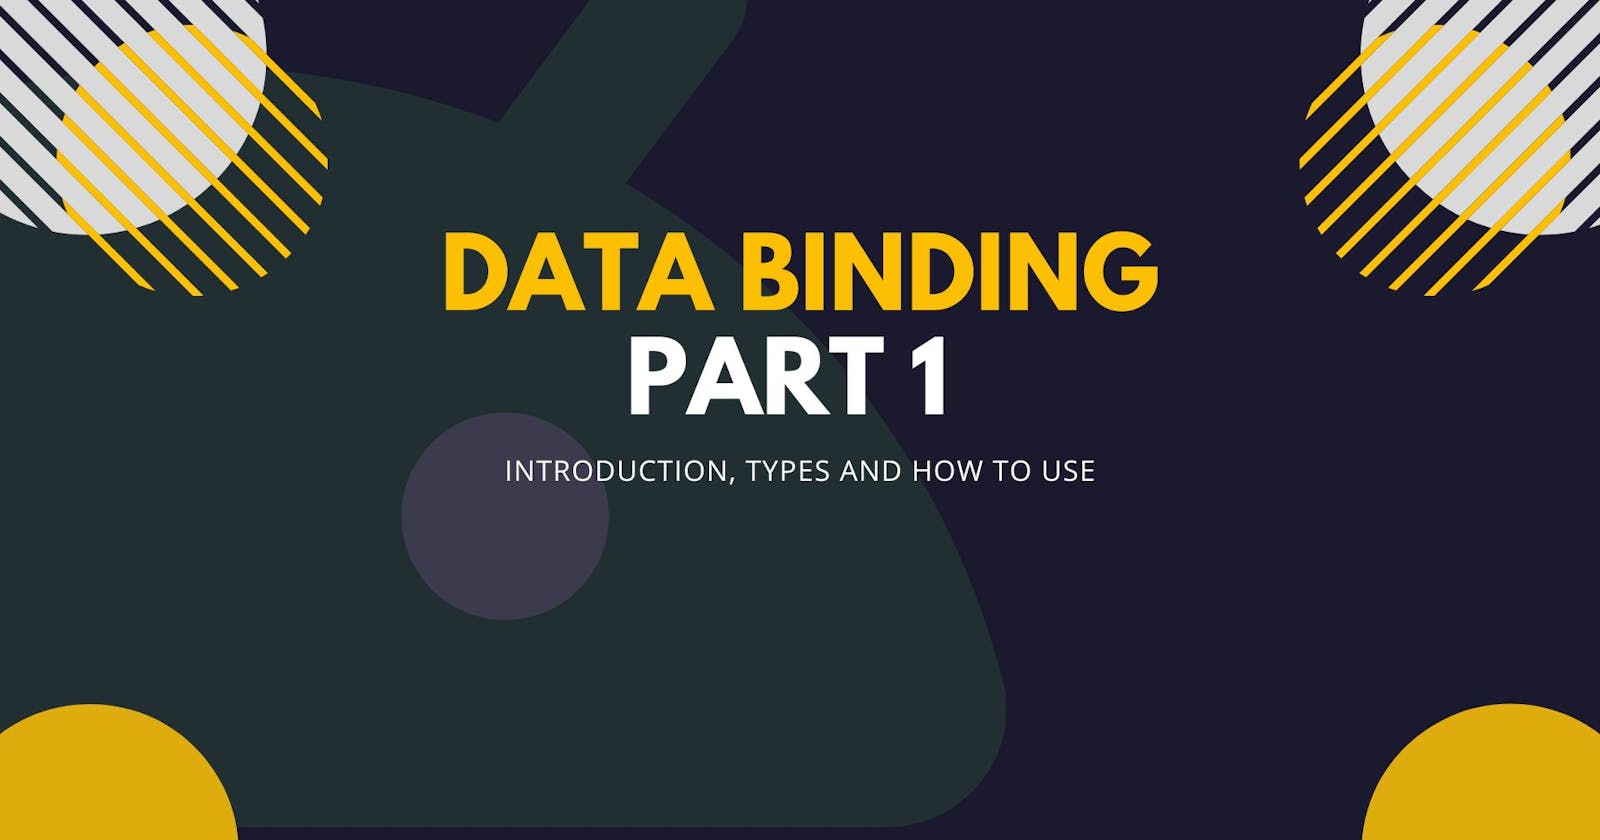 Data Binding Part 1 - The Introduction